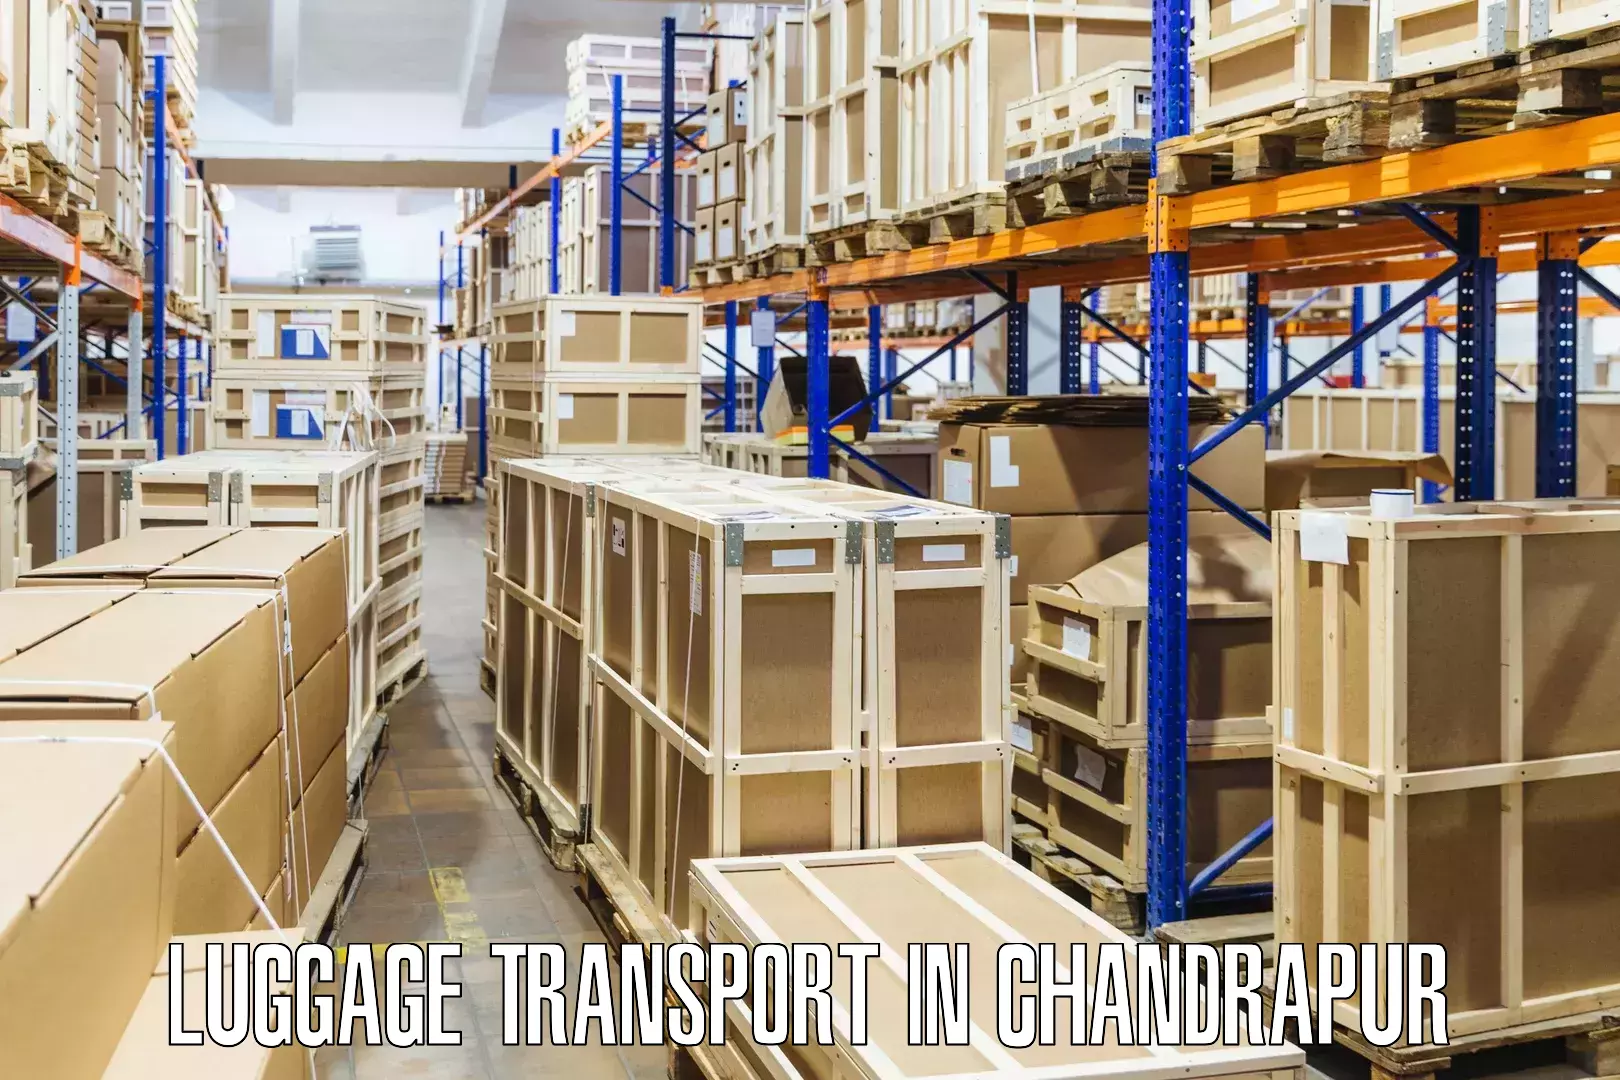 Heavy luggage shipping in Chandrapur